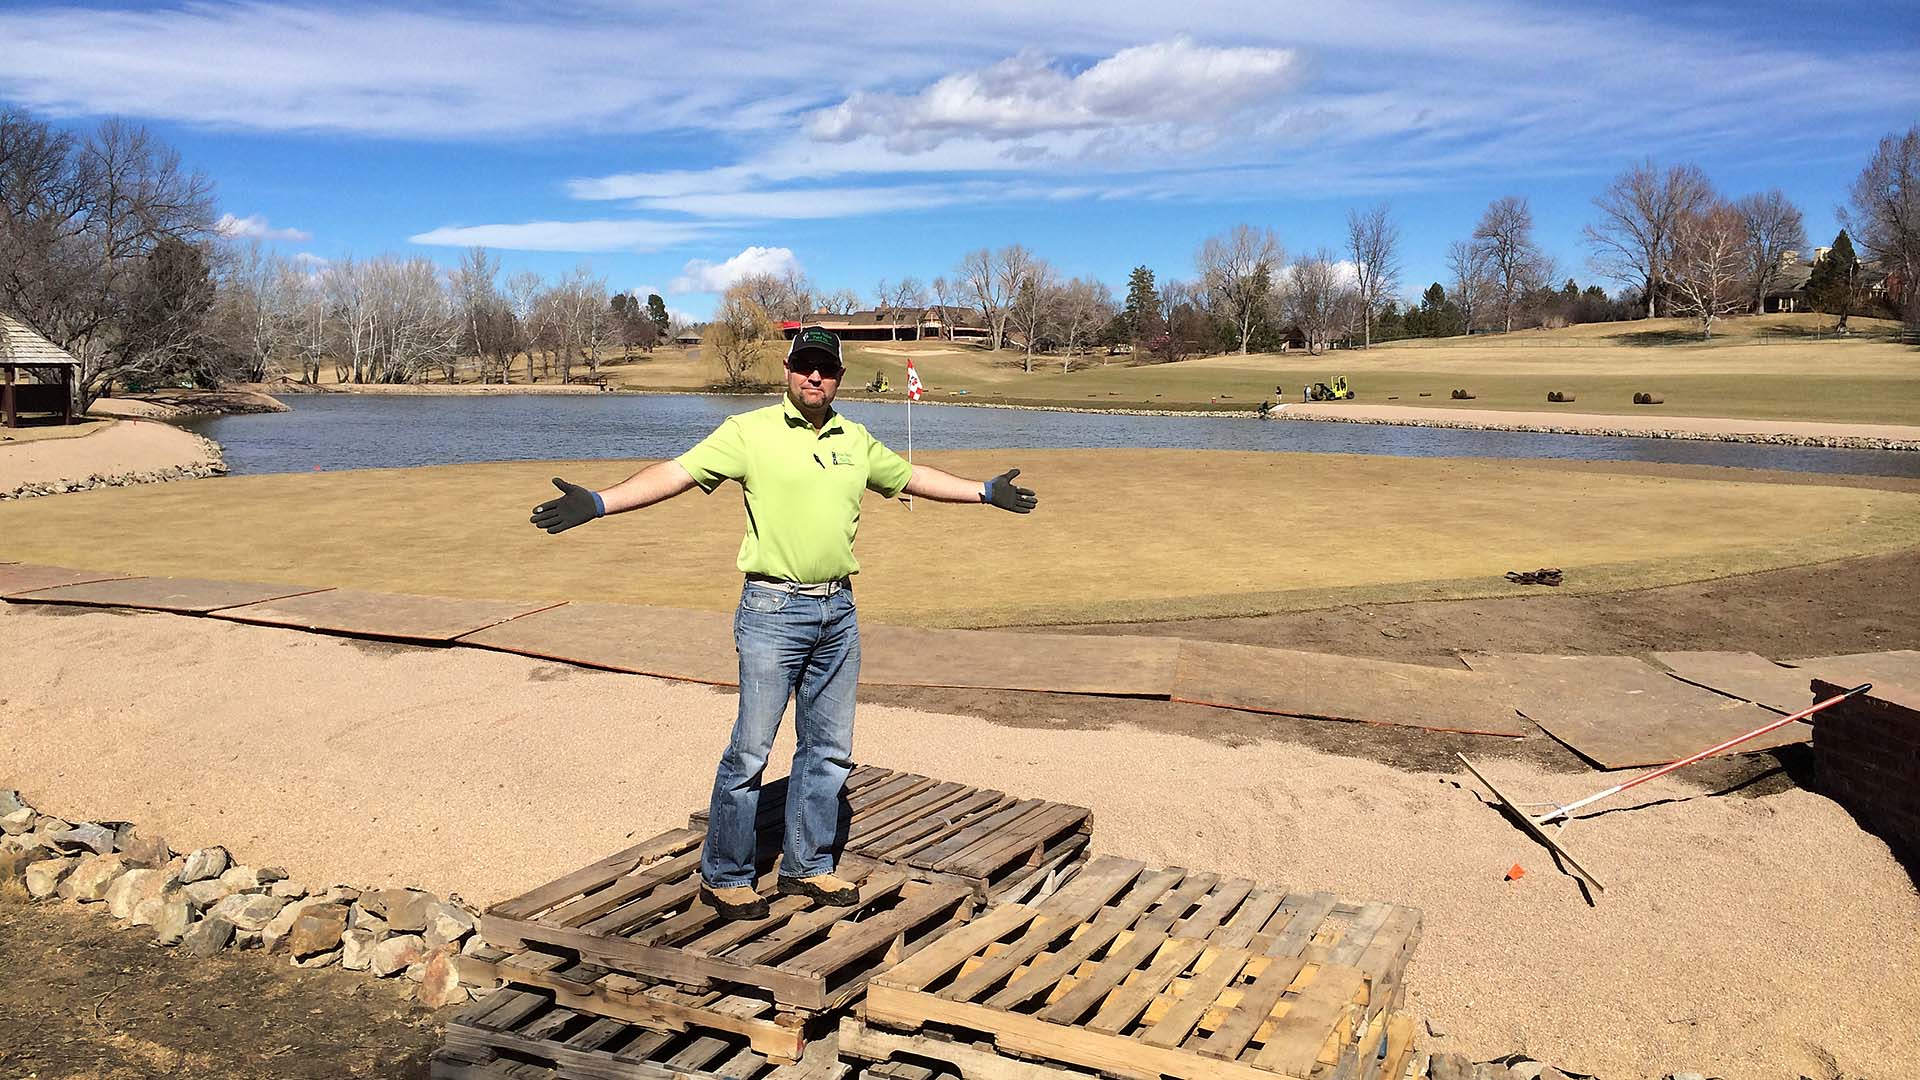 In spring 2014, Cherry Hills Country Club in Colorado rebuild #17 island green surround and the banks around the entire lake in preparation for the 2014 BMW Championship played in August